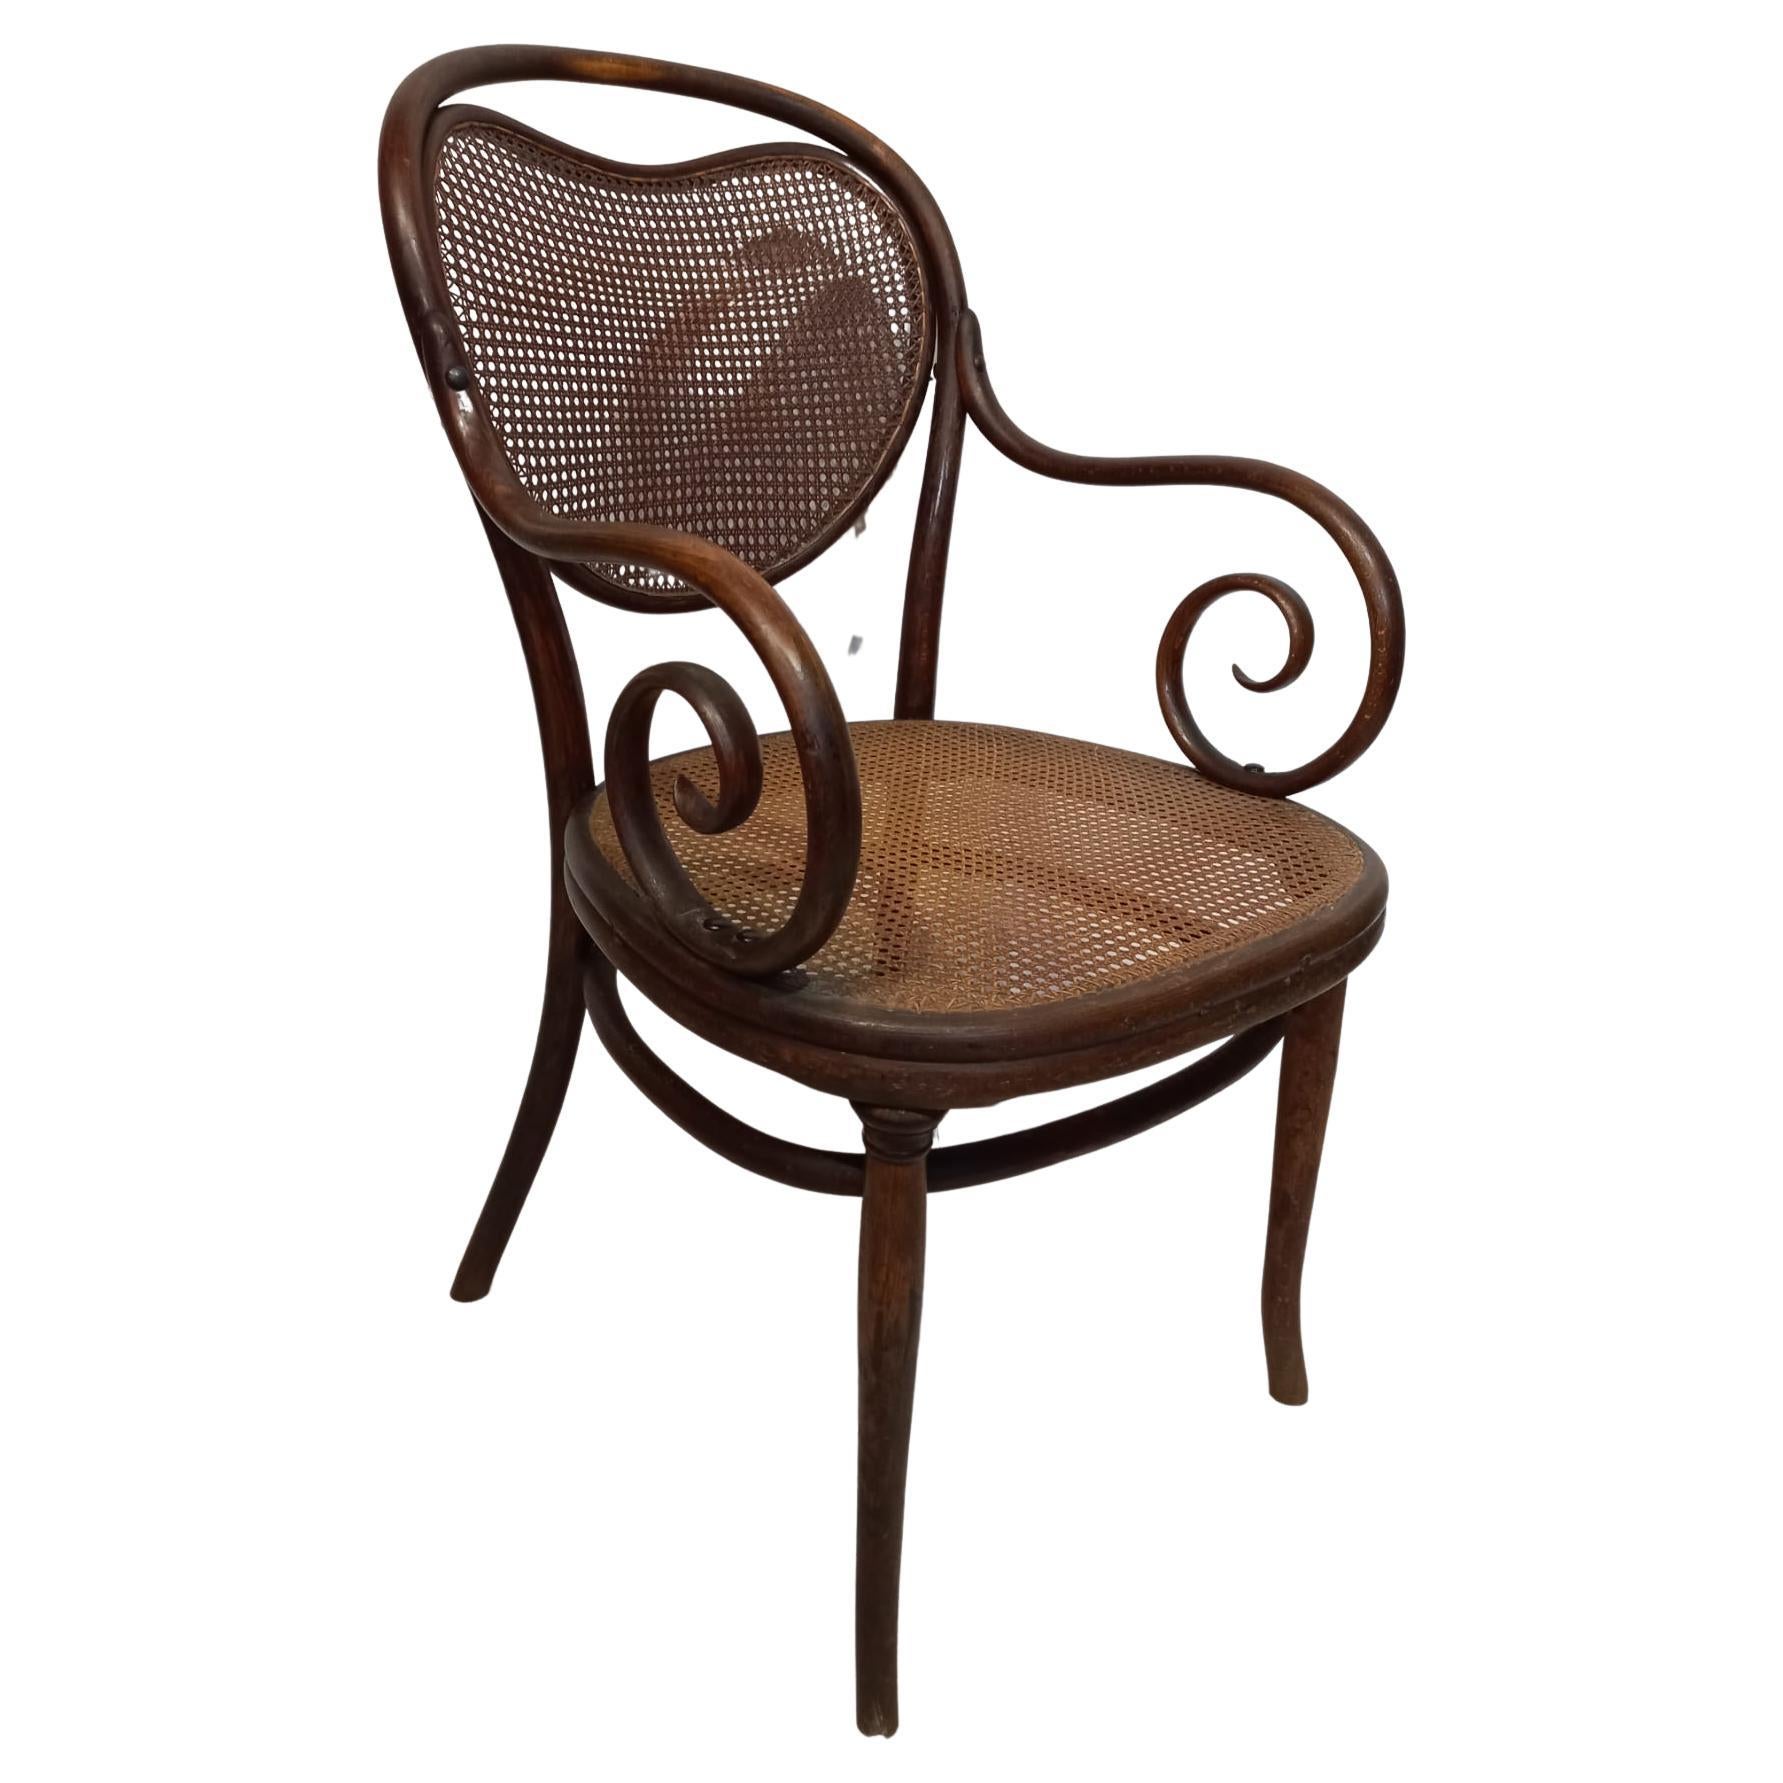 Thonet chair from the 1870s with curved armrests For Sale